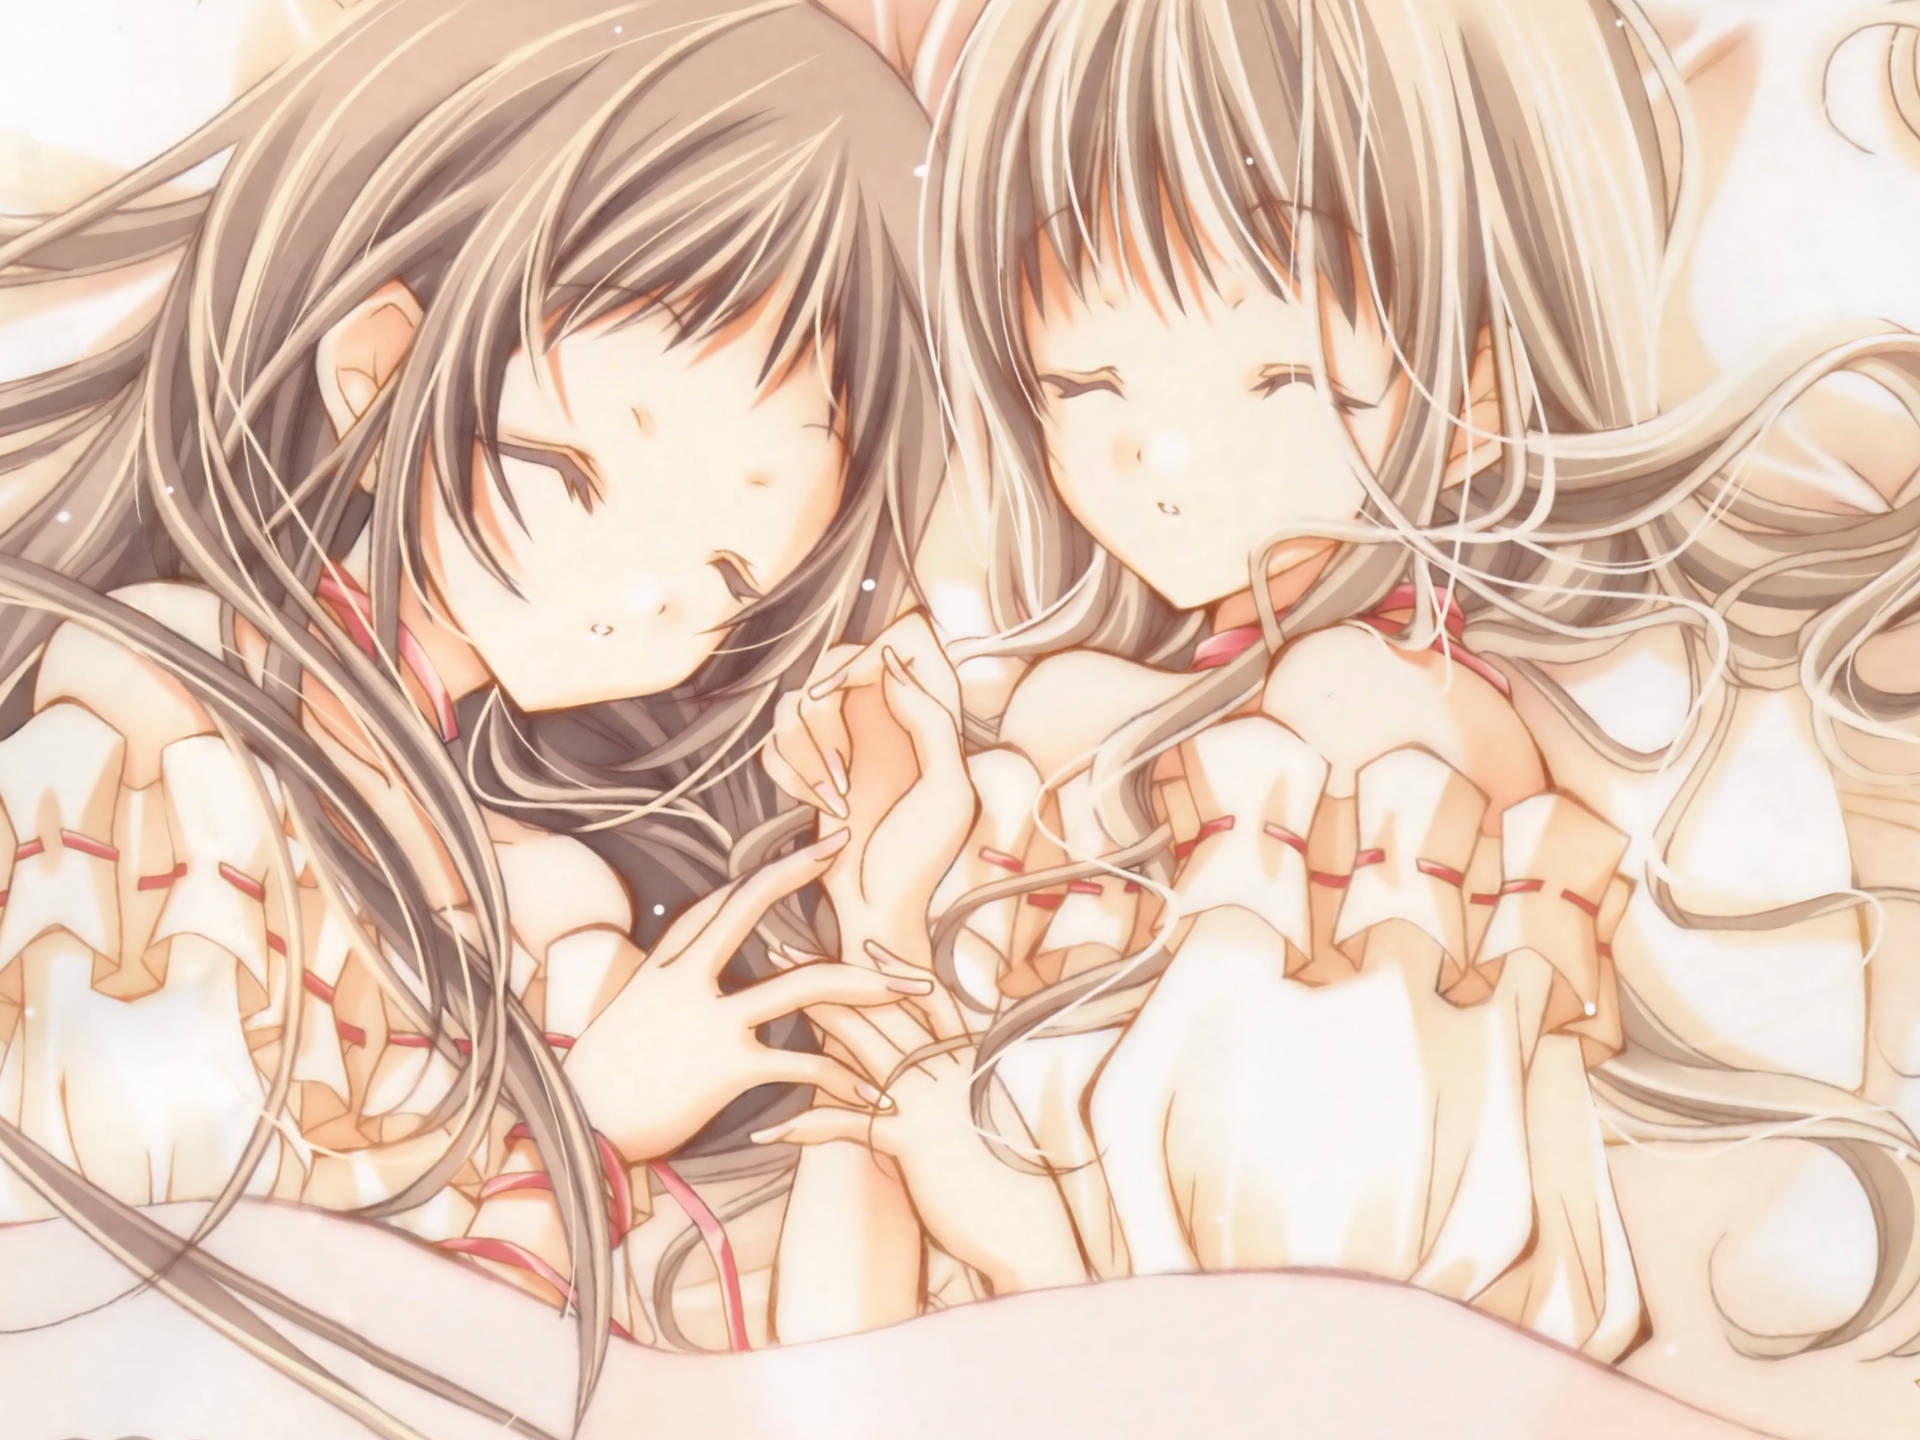 An intimate moment between Maki and Hikari from the world of Anime Wallpaper